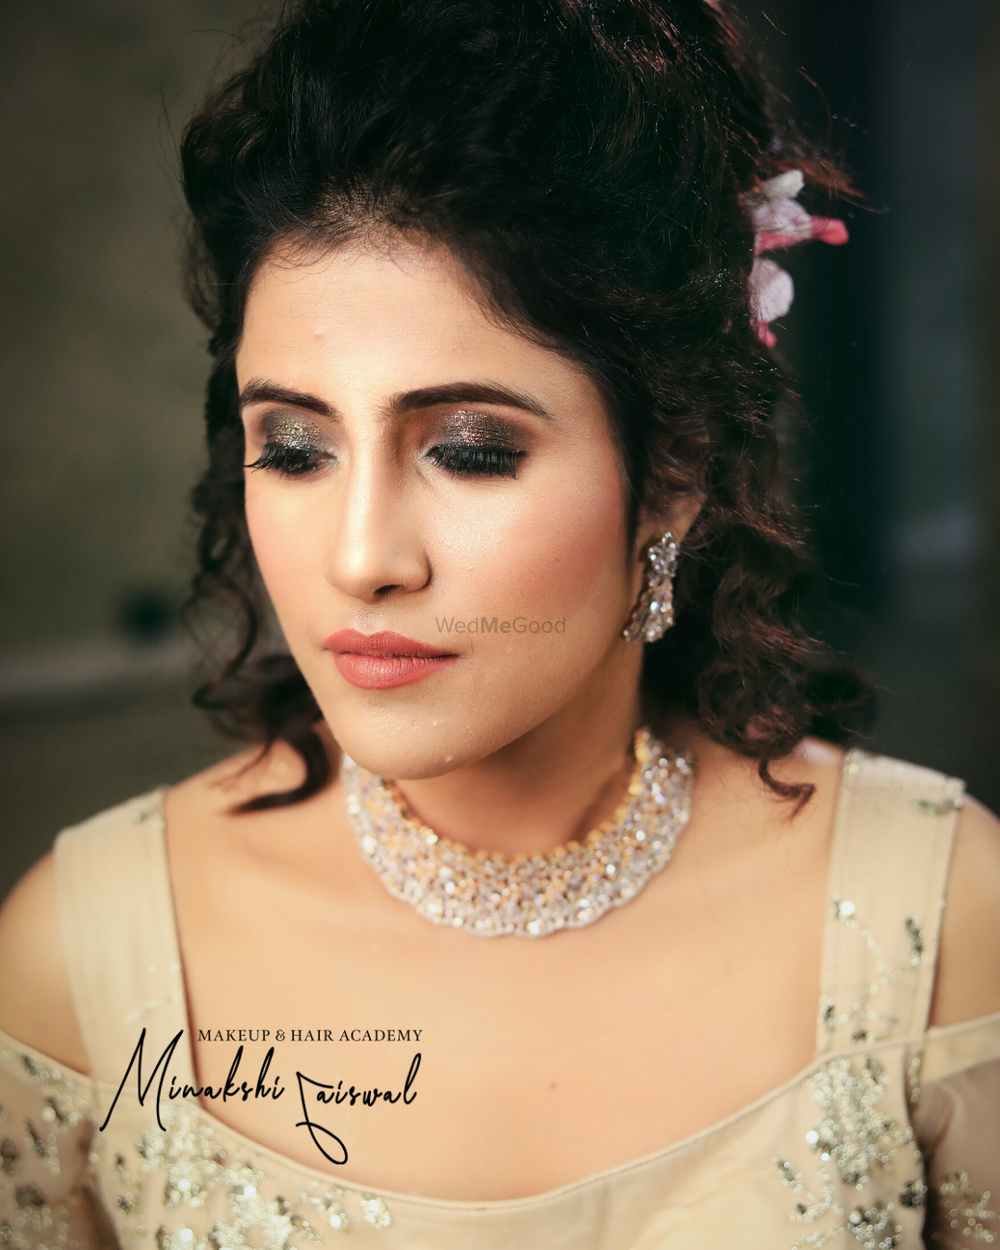 Photo From Makeup_2020 - By Minakshi Jaiswal Professional Makup (MJ)